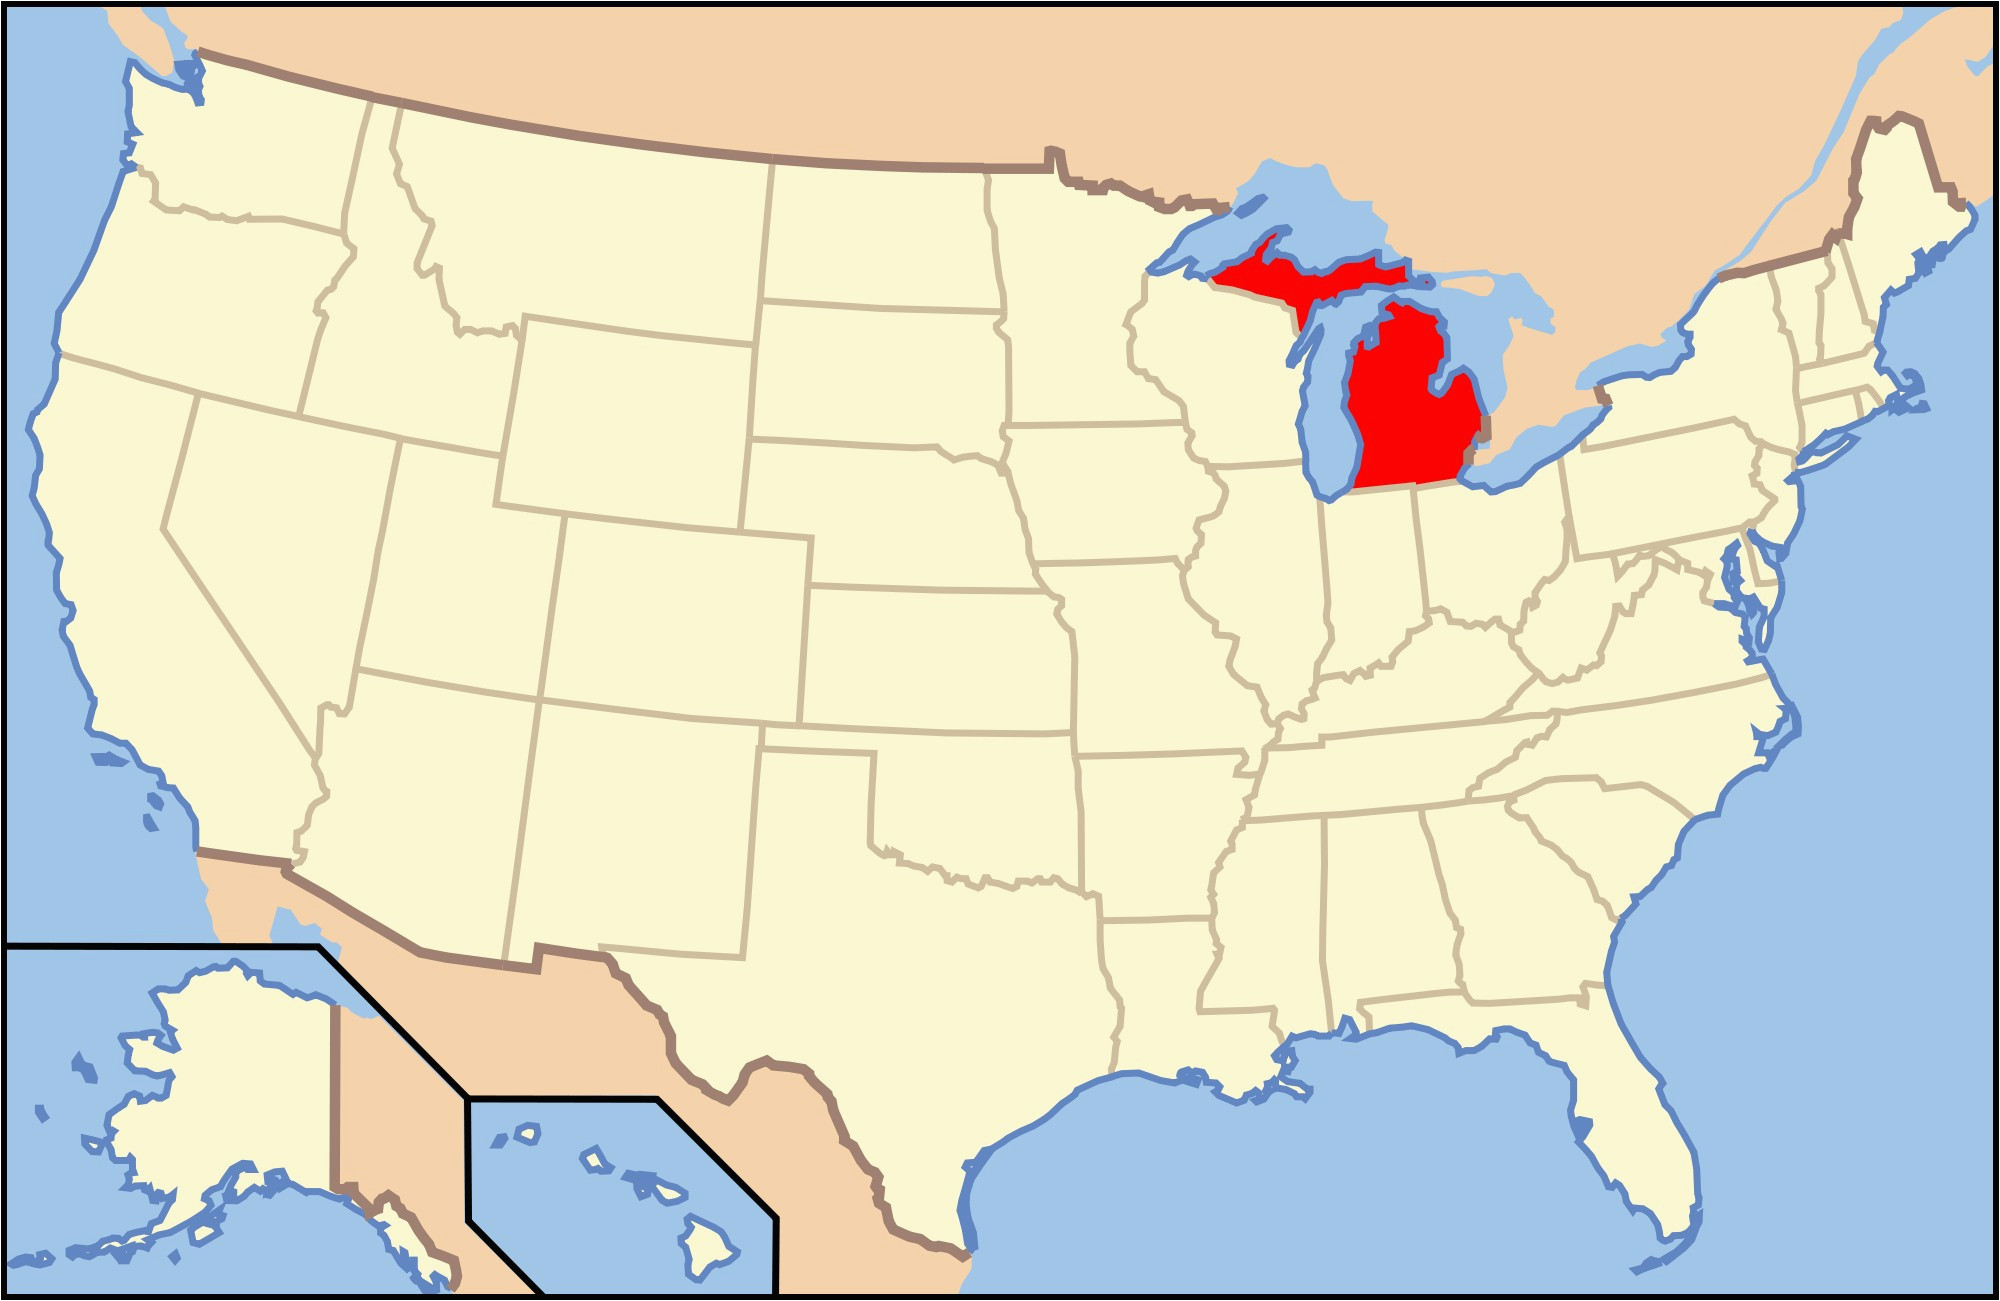 casinos in the united states map best index of michigan articles